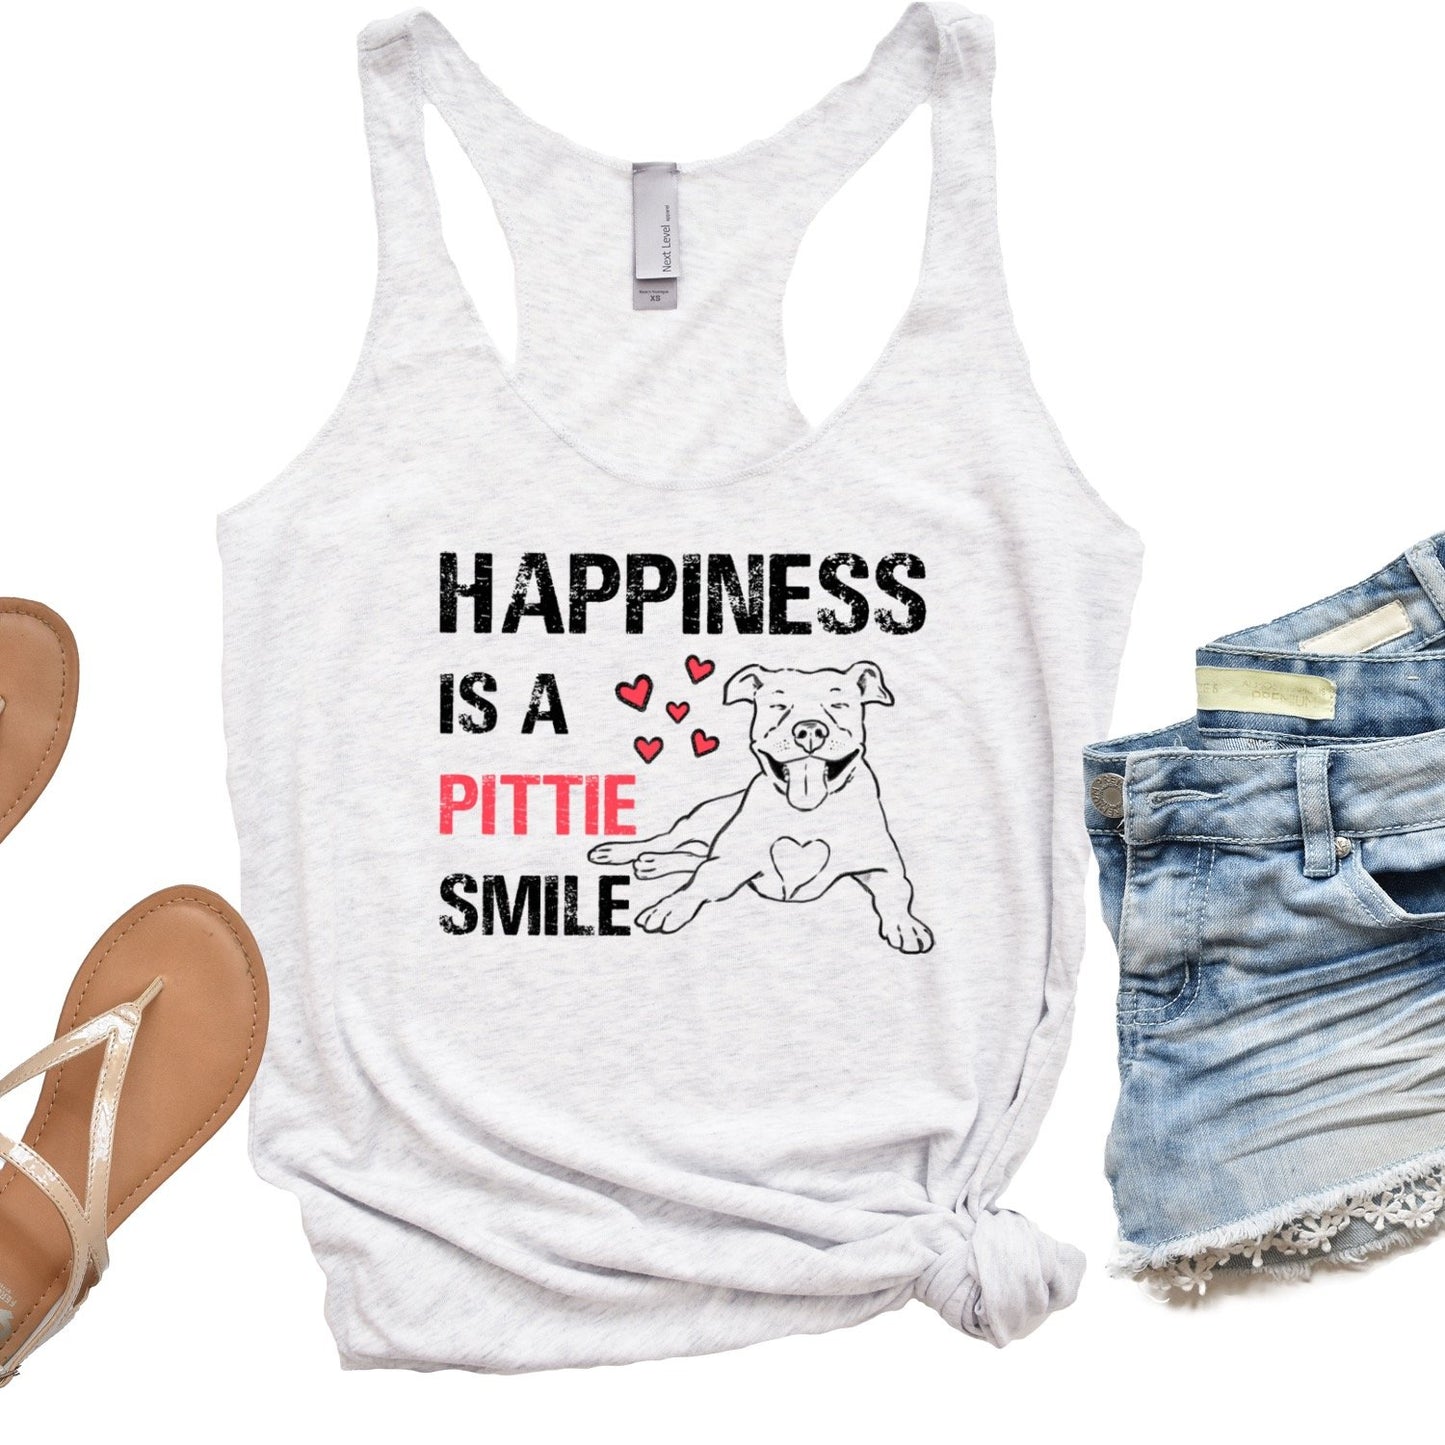 T-Shirts - Happiness Is A Pittie Smile Racerback Tank